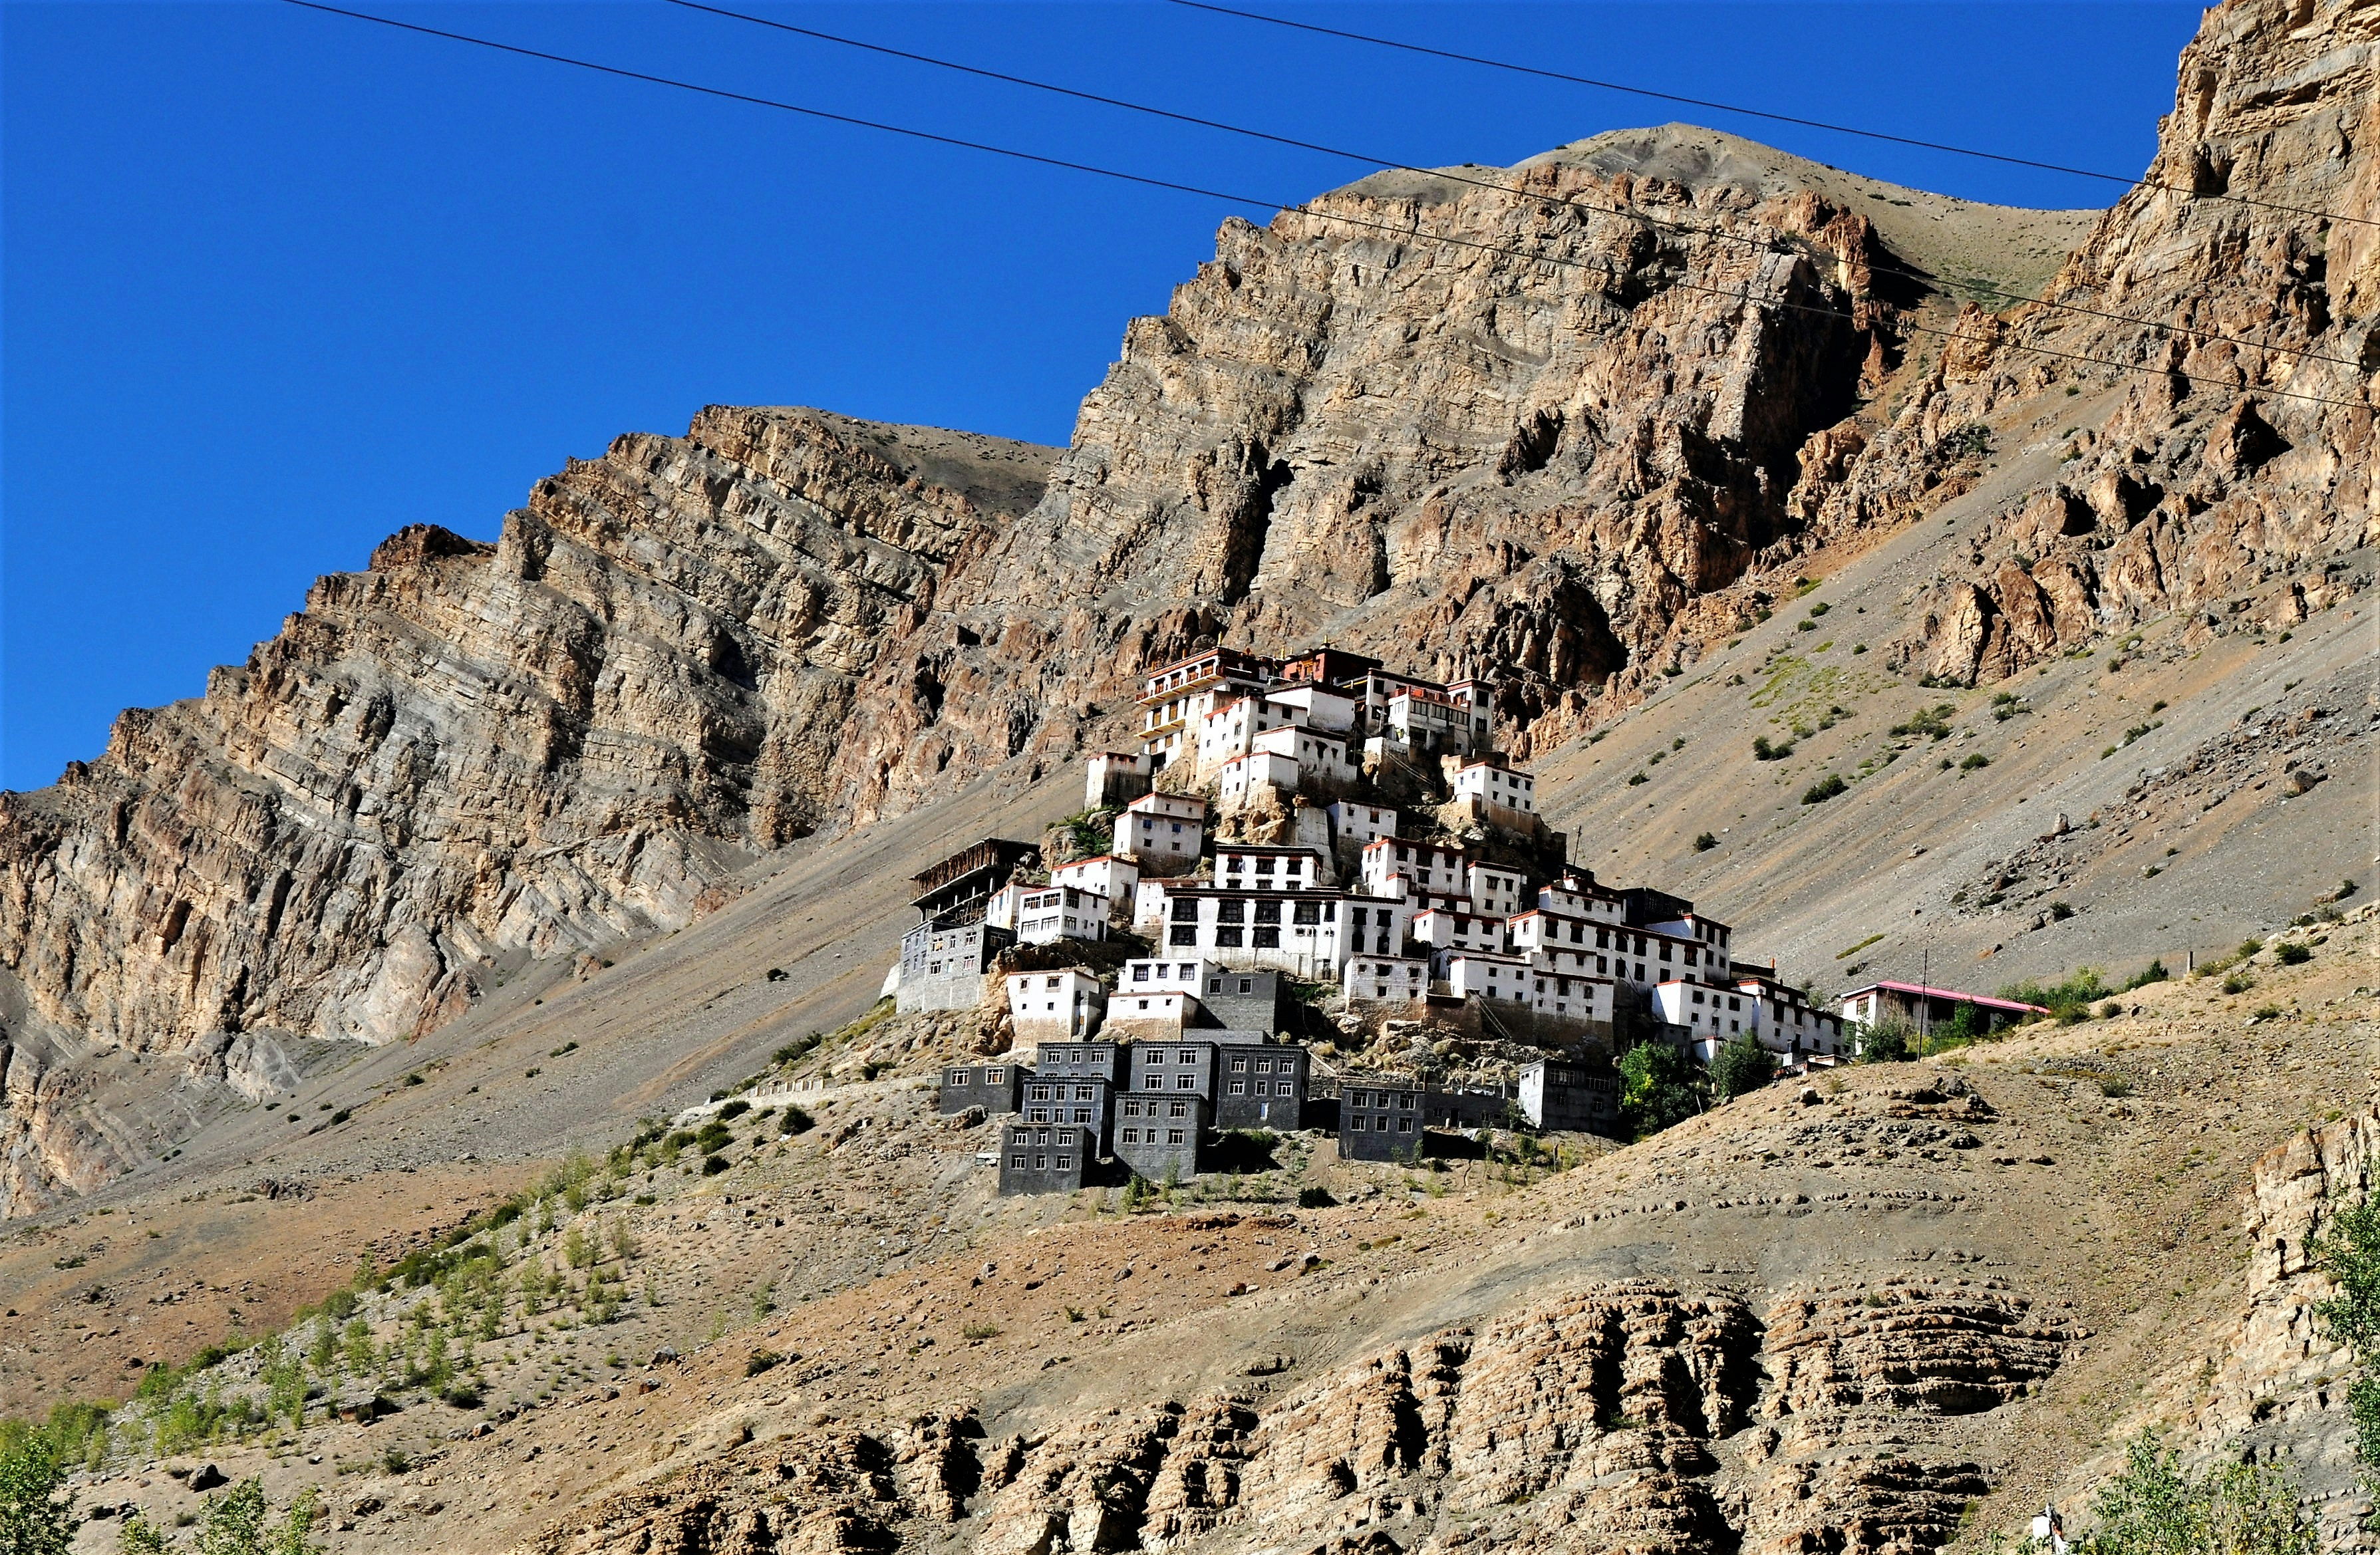 Overlooking Kaza from a height of 13,500 ft, the Kye monastery is the largest in the valley & holds a powerful sway over the most populous part of the valley around Kaza. The gompa is an irregular heap of low rooms & narrow corridors on a monolithic conical hill. From a distance is resembles the Thiksey monastery near Leh in Ladakh. The irregular prayer chambers are interconnected by dark passages, tortuous staircases and small doors. Hundreds of lamas receive their religious training in the monastery. It is also known for its beautiful murals, thankas, rare manuscripts, stucco images etc.